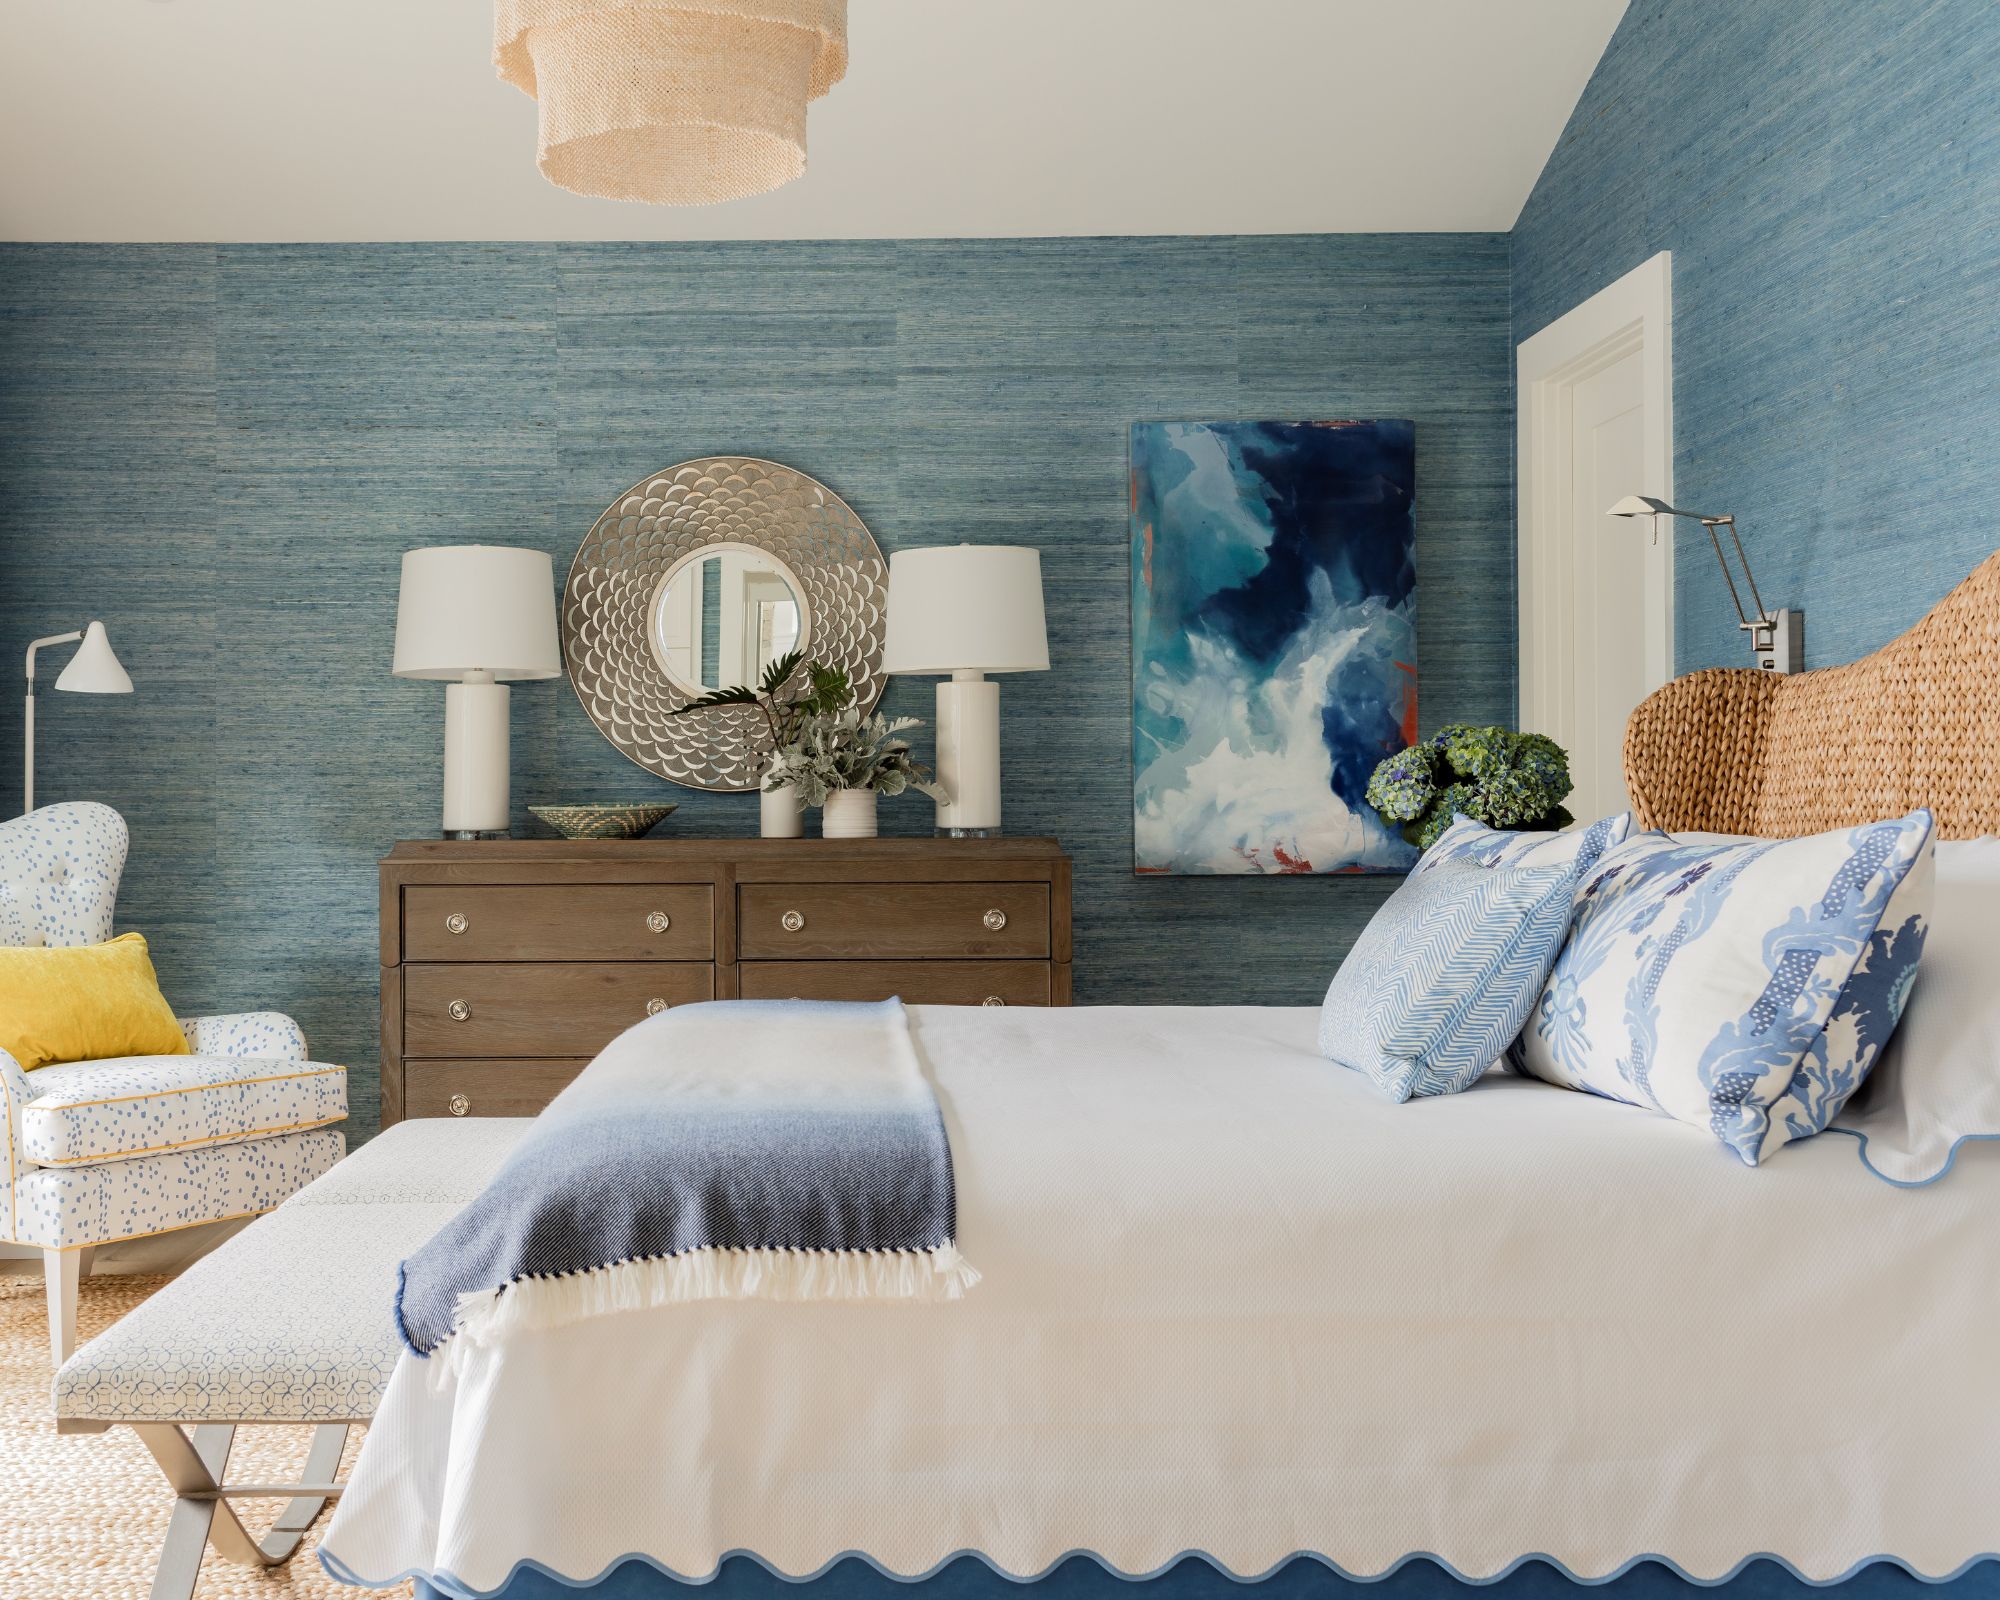 5 ways to decorate with a coastal color palette for a…